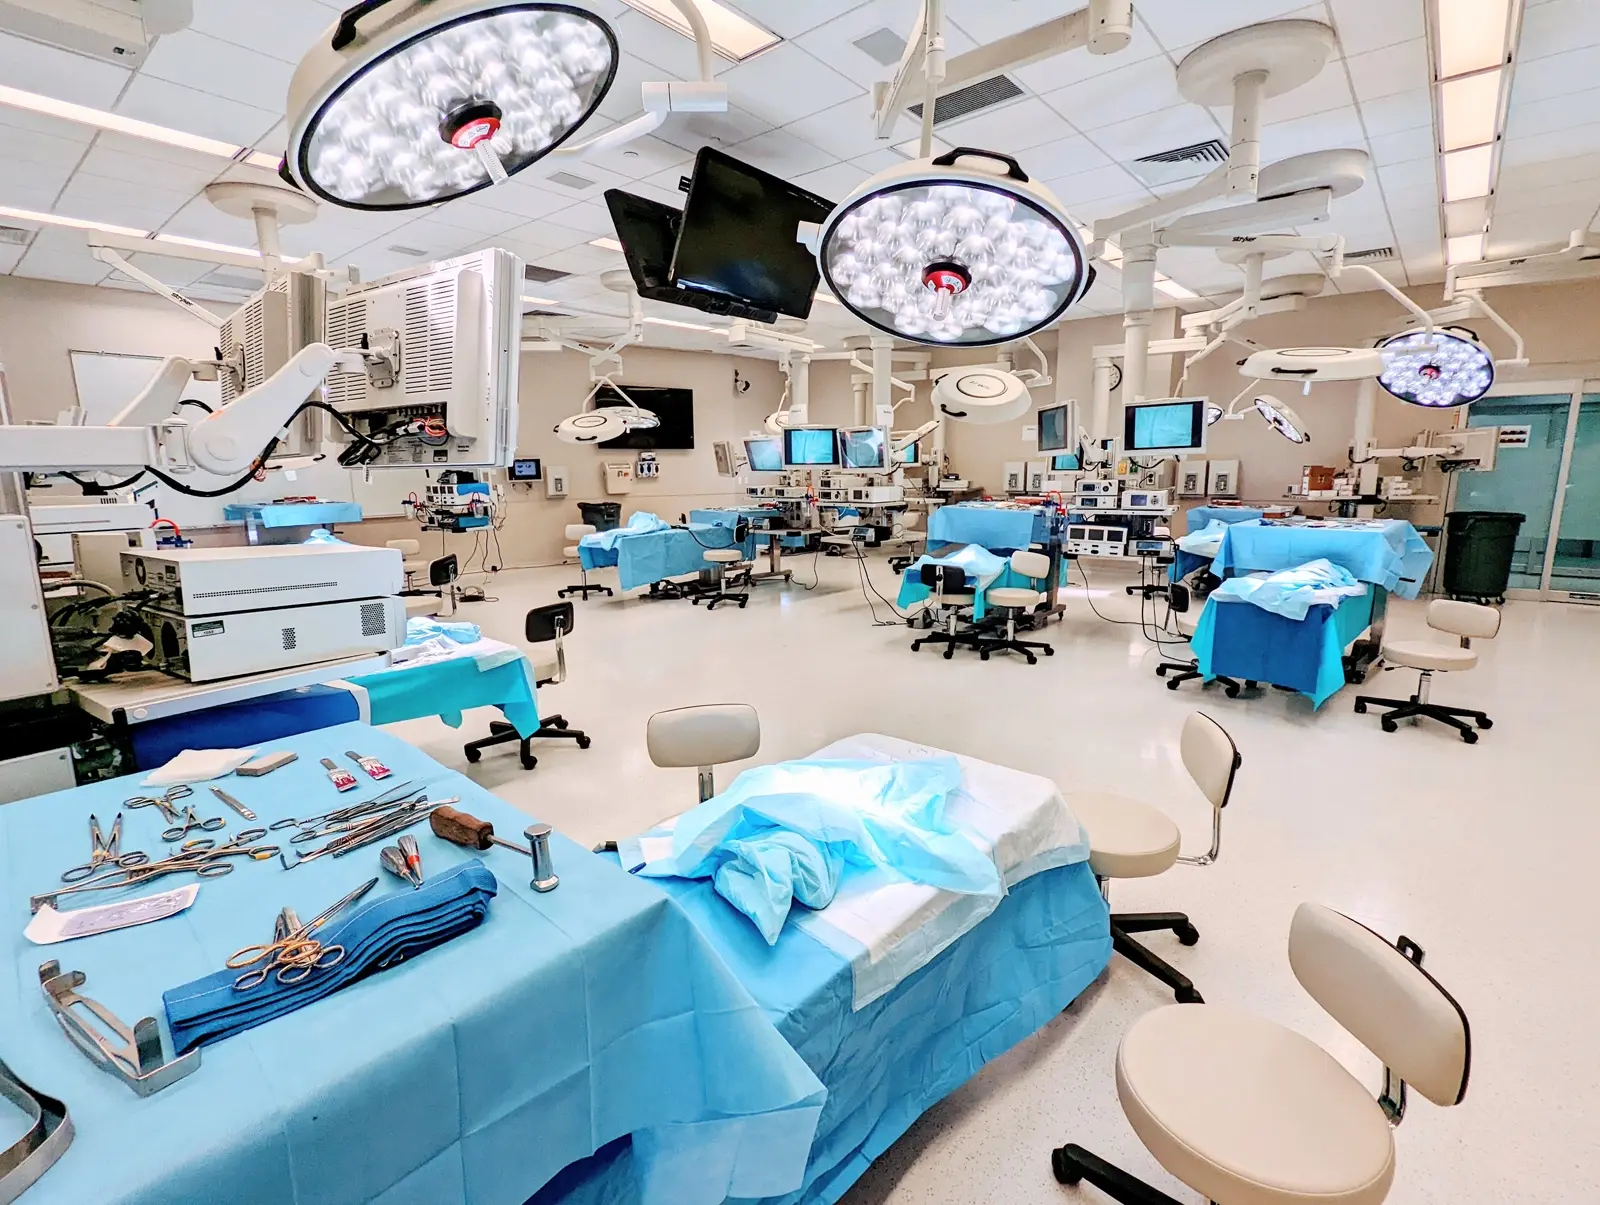 CAMLS A brightly lit surgical room equipped with multiple operating tables covered with blue drapes. Overhead surgical lights, monitors, and various medical instruments are neatly arranged. The room is clean and well-organized, ready for medical procedures.